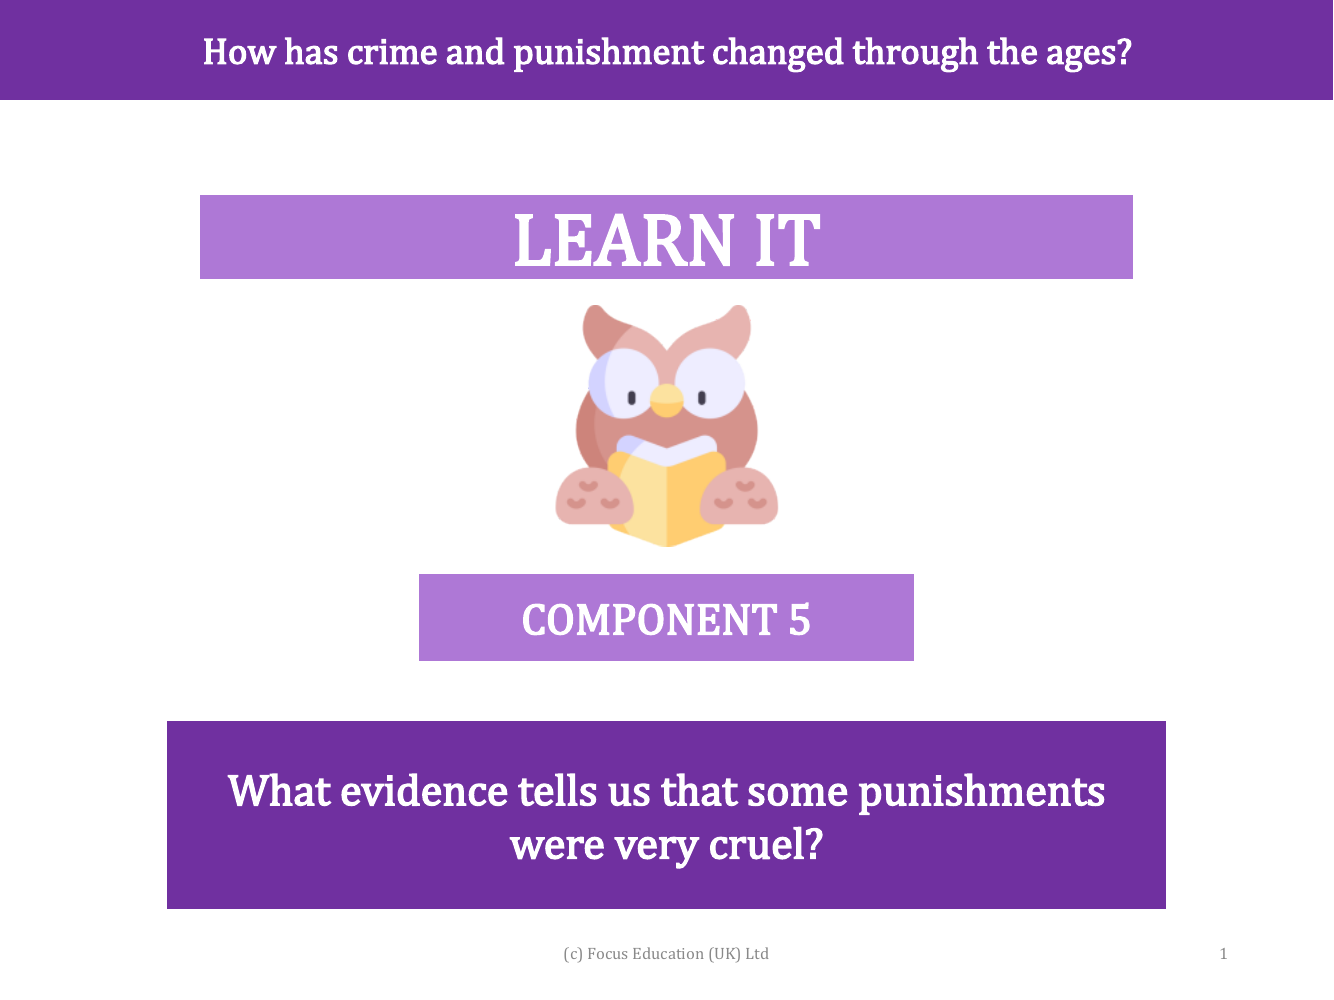 What evidence tells us that some punishments were very cruel? - Presentation